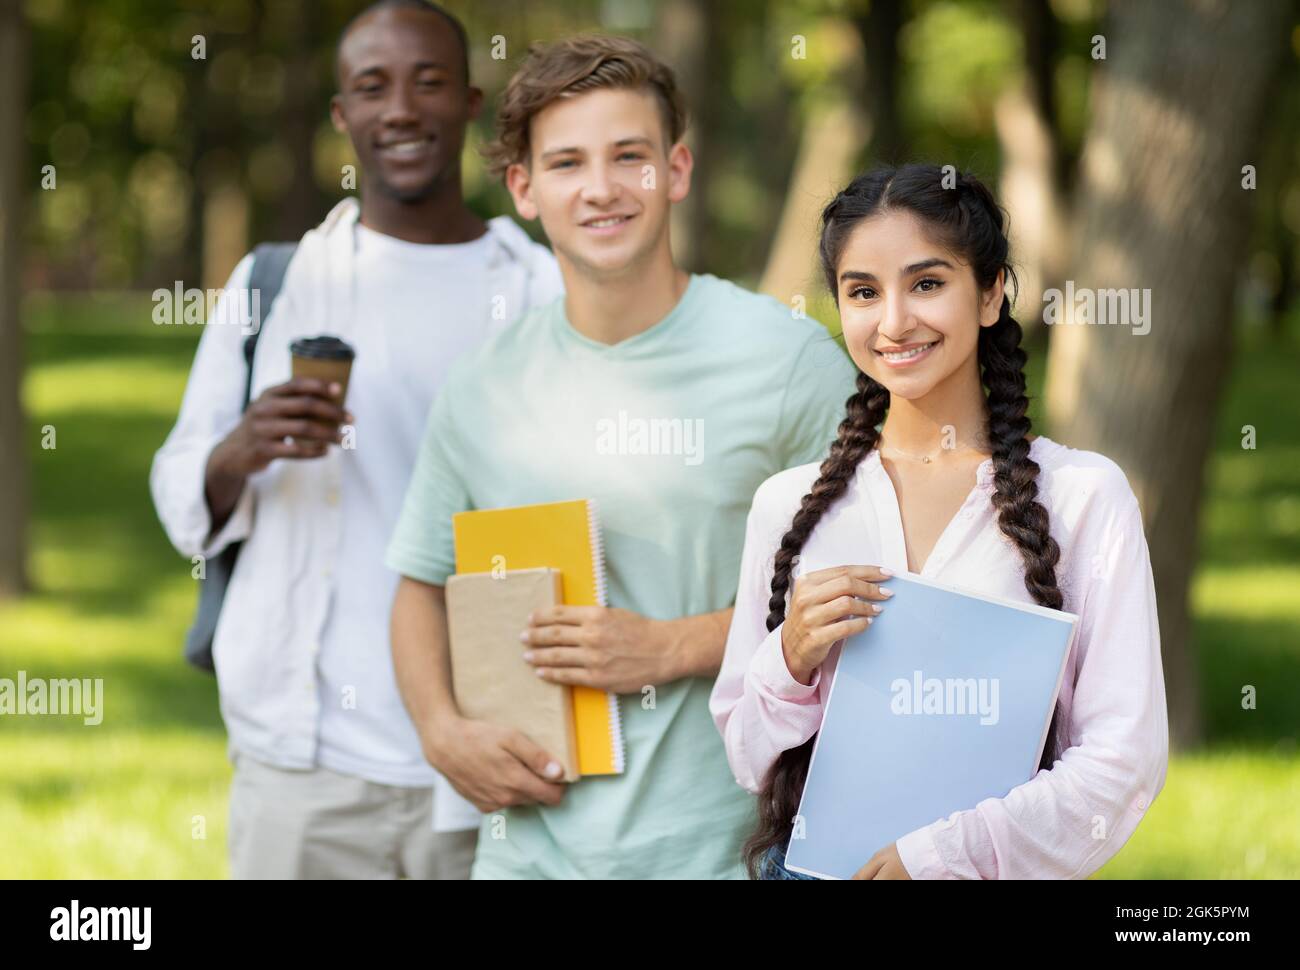 University friends. Portrait of multiethnic teens posing outdoors with notepads and books, walking in college campus Stock Photo